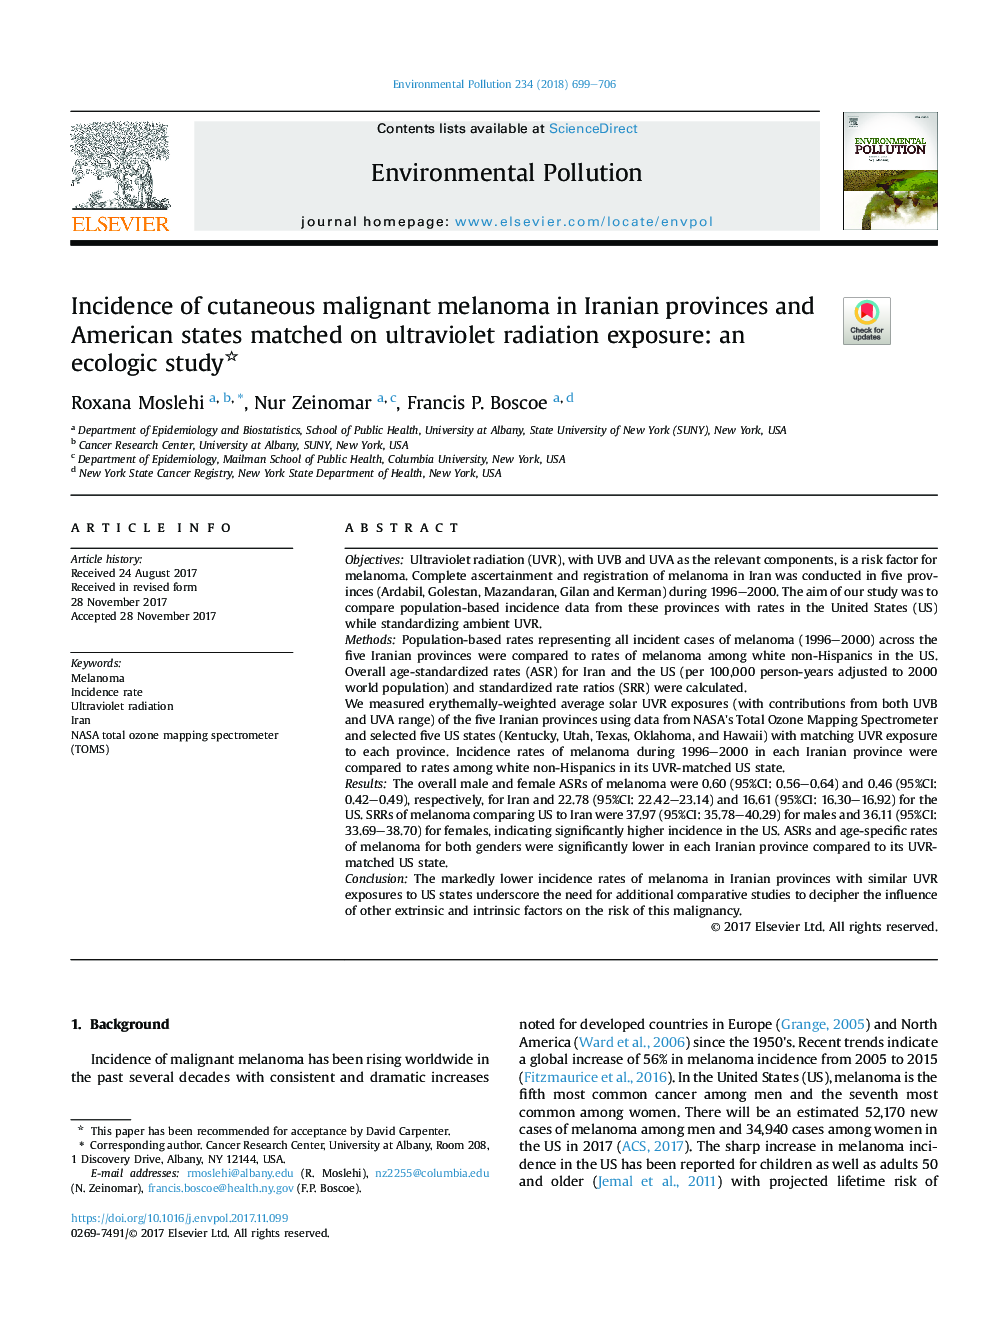 Incidence of cutaneous malignant melanoma in Iranian provinces and American states matched on ultraviolet radiation exposure: an ecologic study